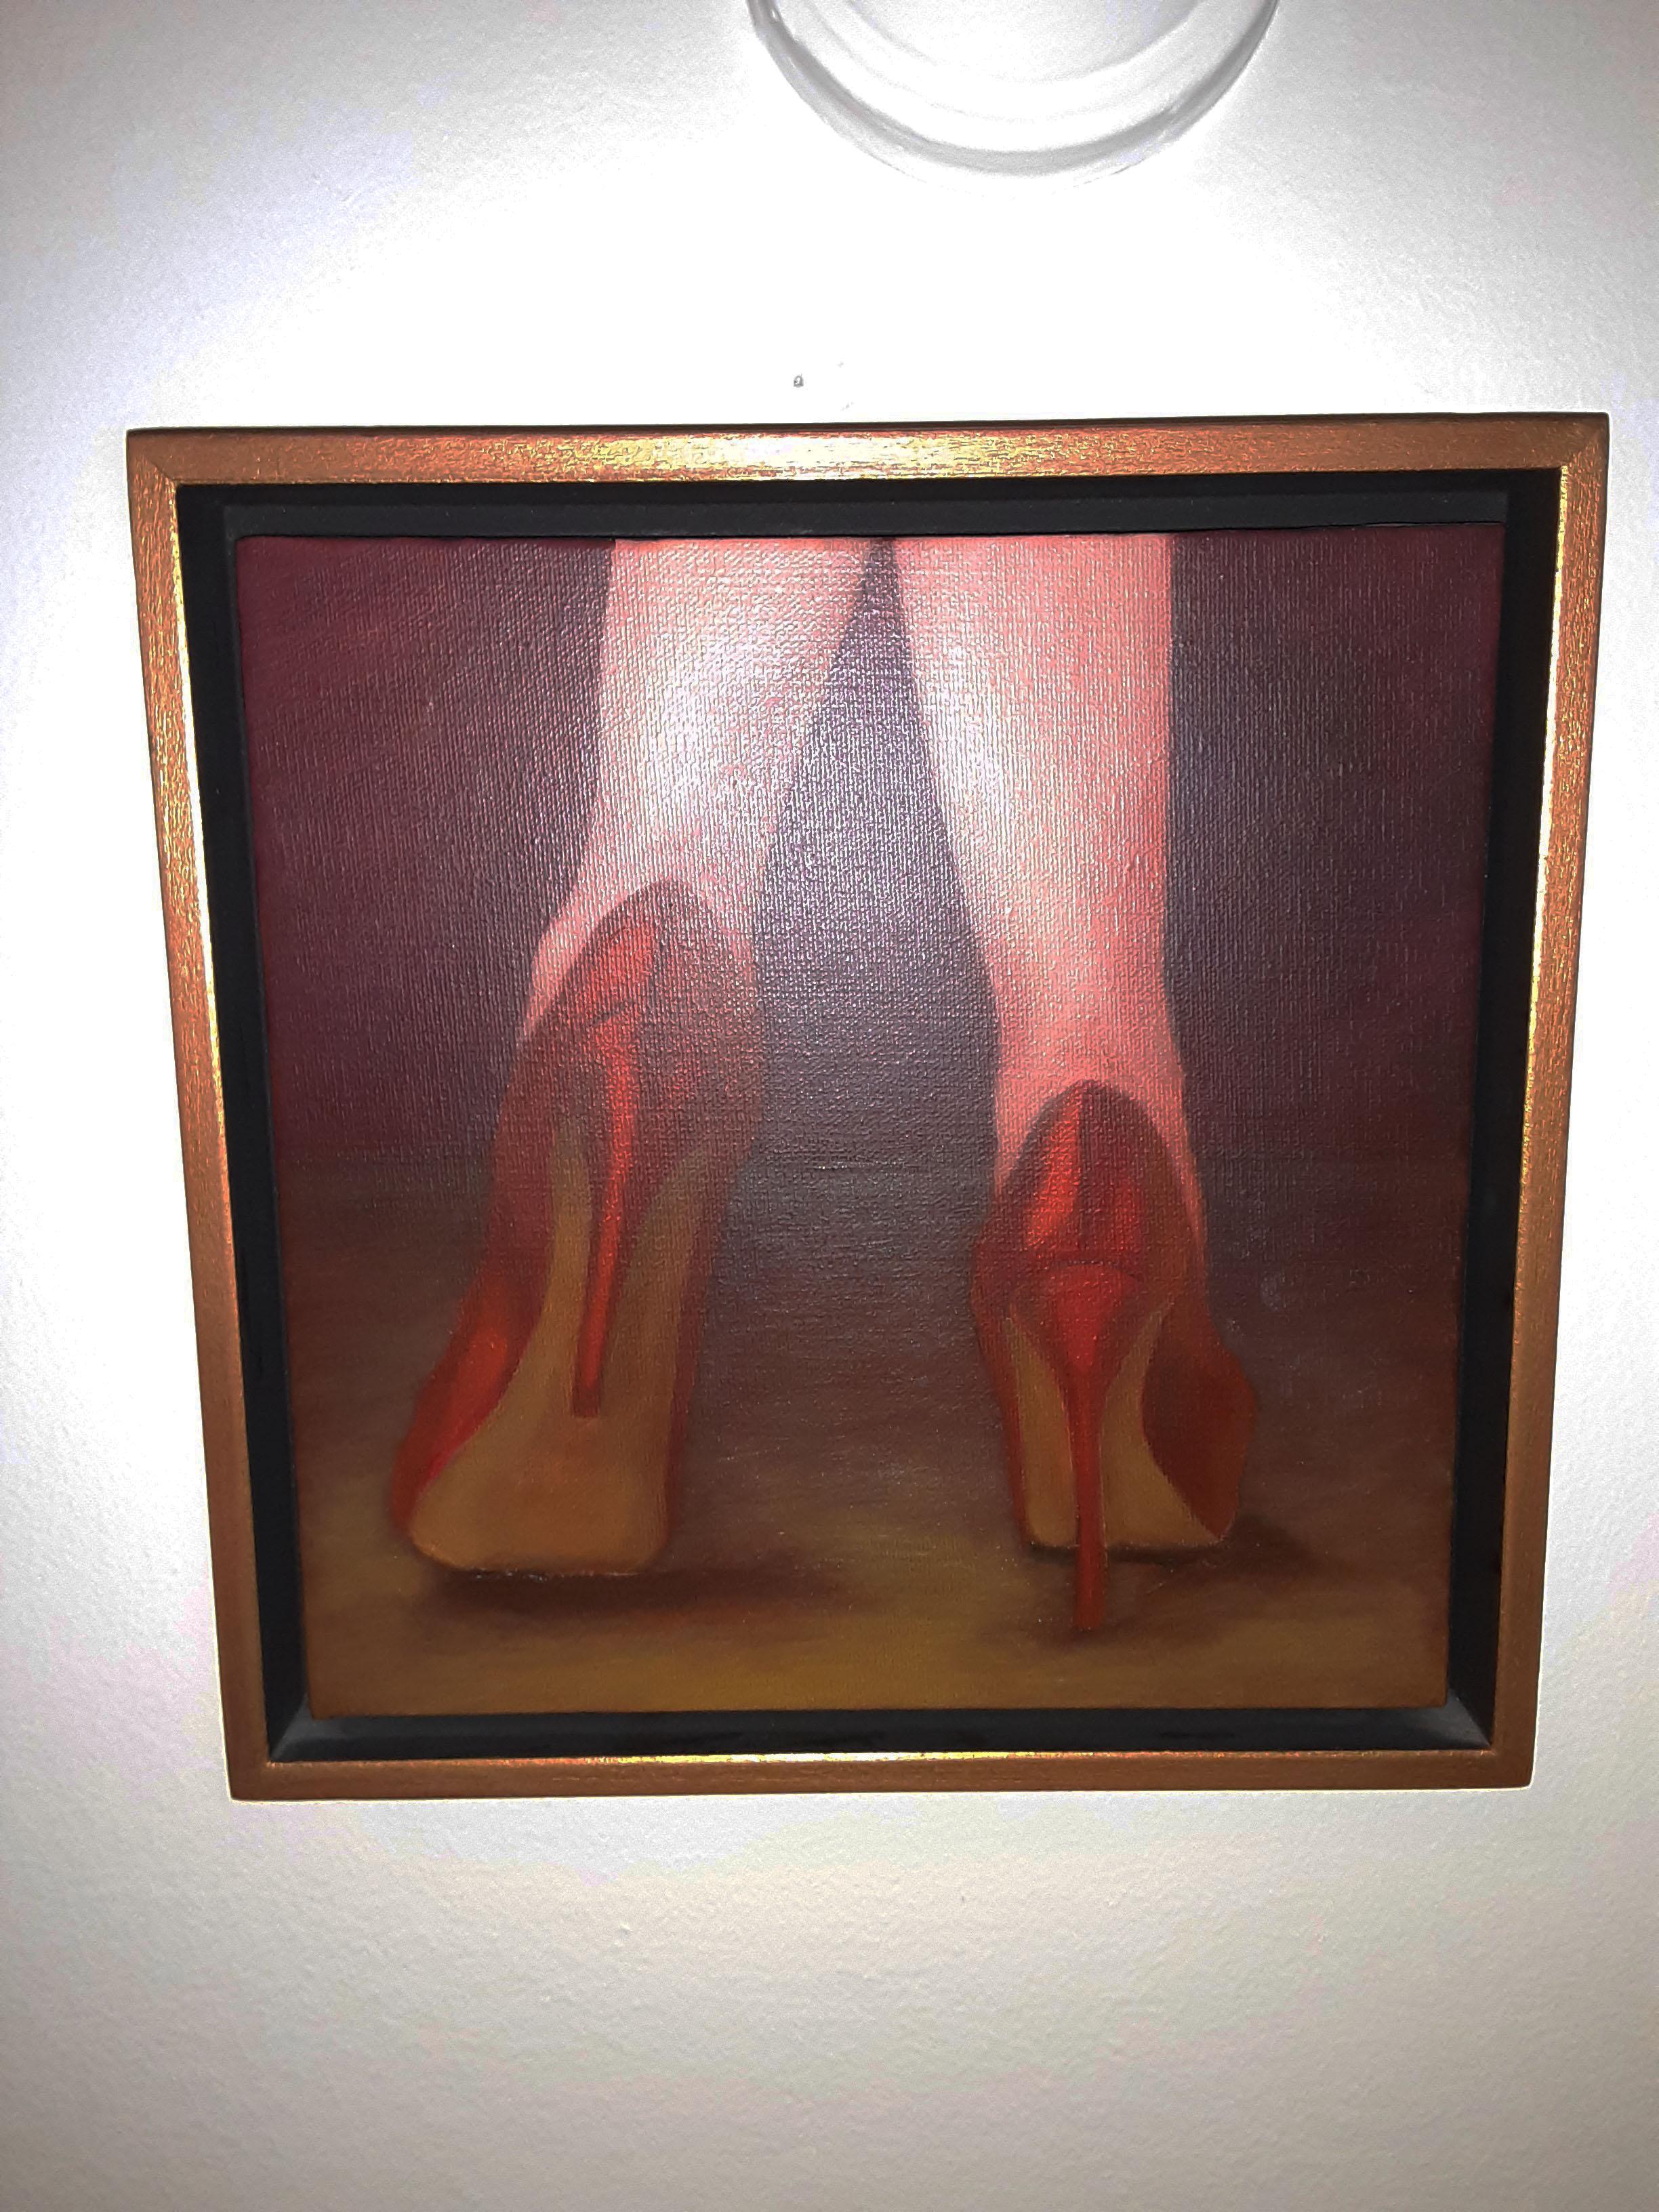 This oil on canvas painting features a beautifully formed pair of women's legs in classic red stiletto heels. The background of the painting also shares these same red tones adding to the almost romantic and warm nature of the work. The painting is